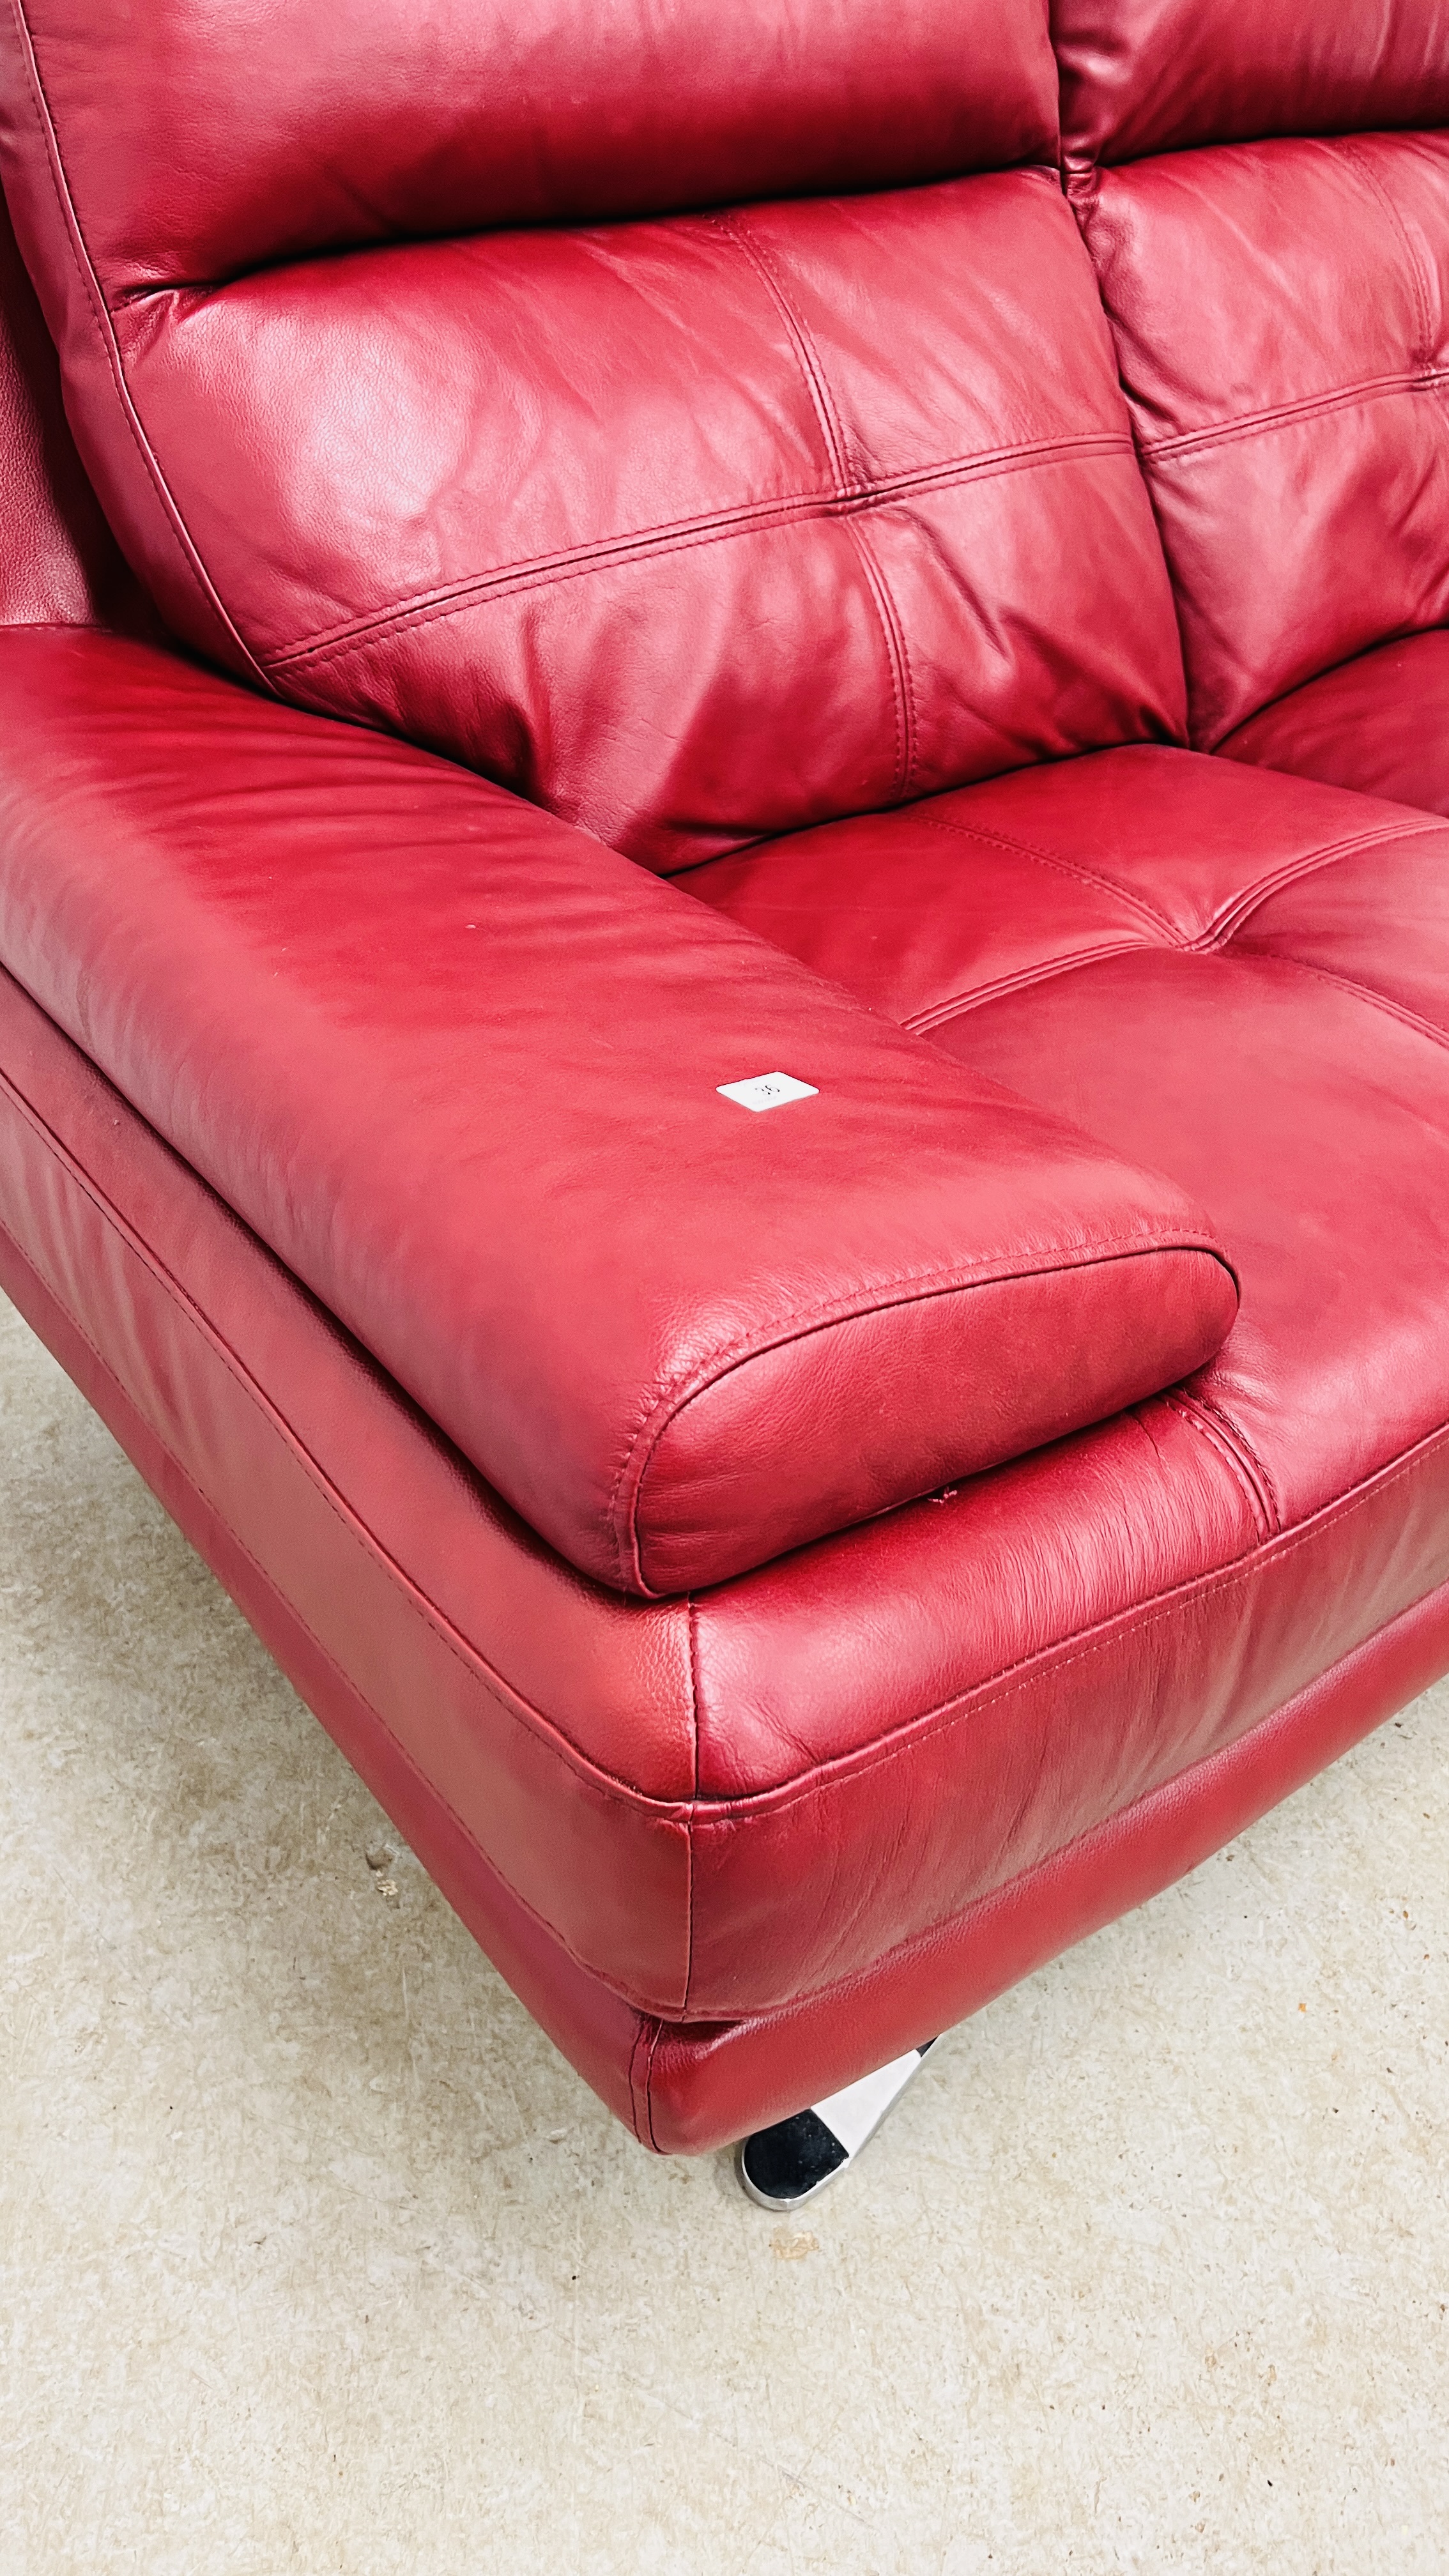 A DESIGNER ITALIAN RED LEATHER TWO SEATER SOFA W 180CM. - Image 9 of 10